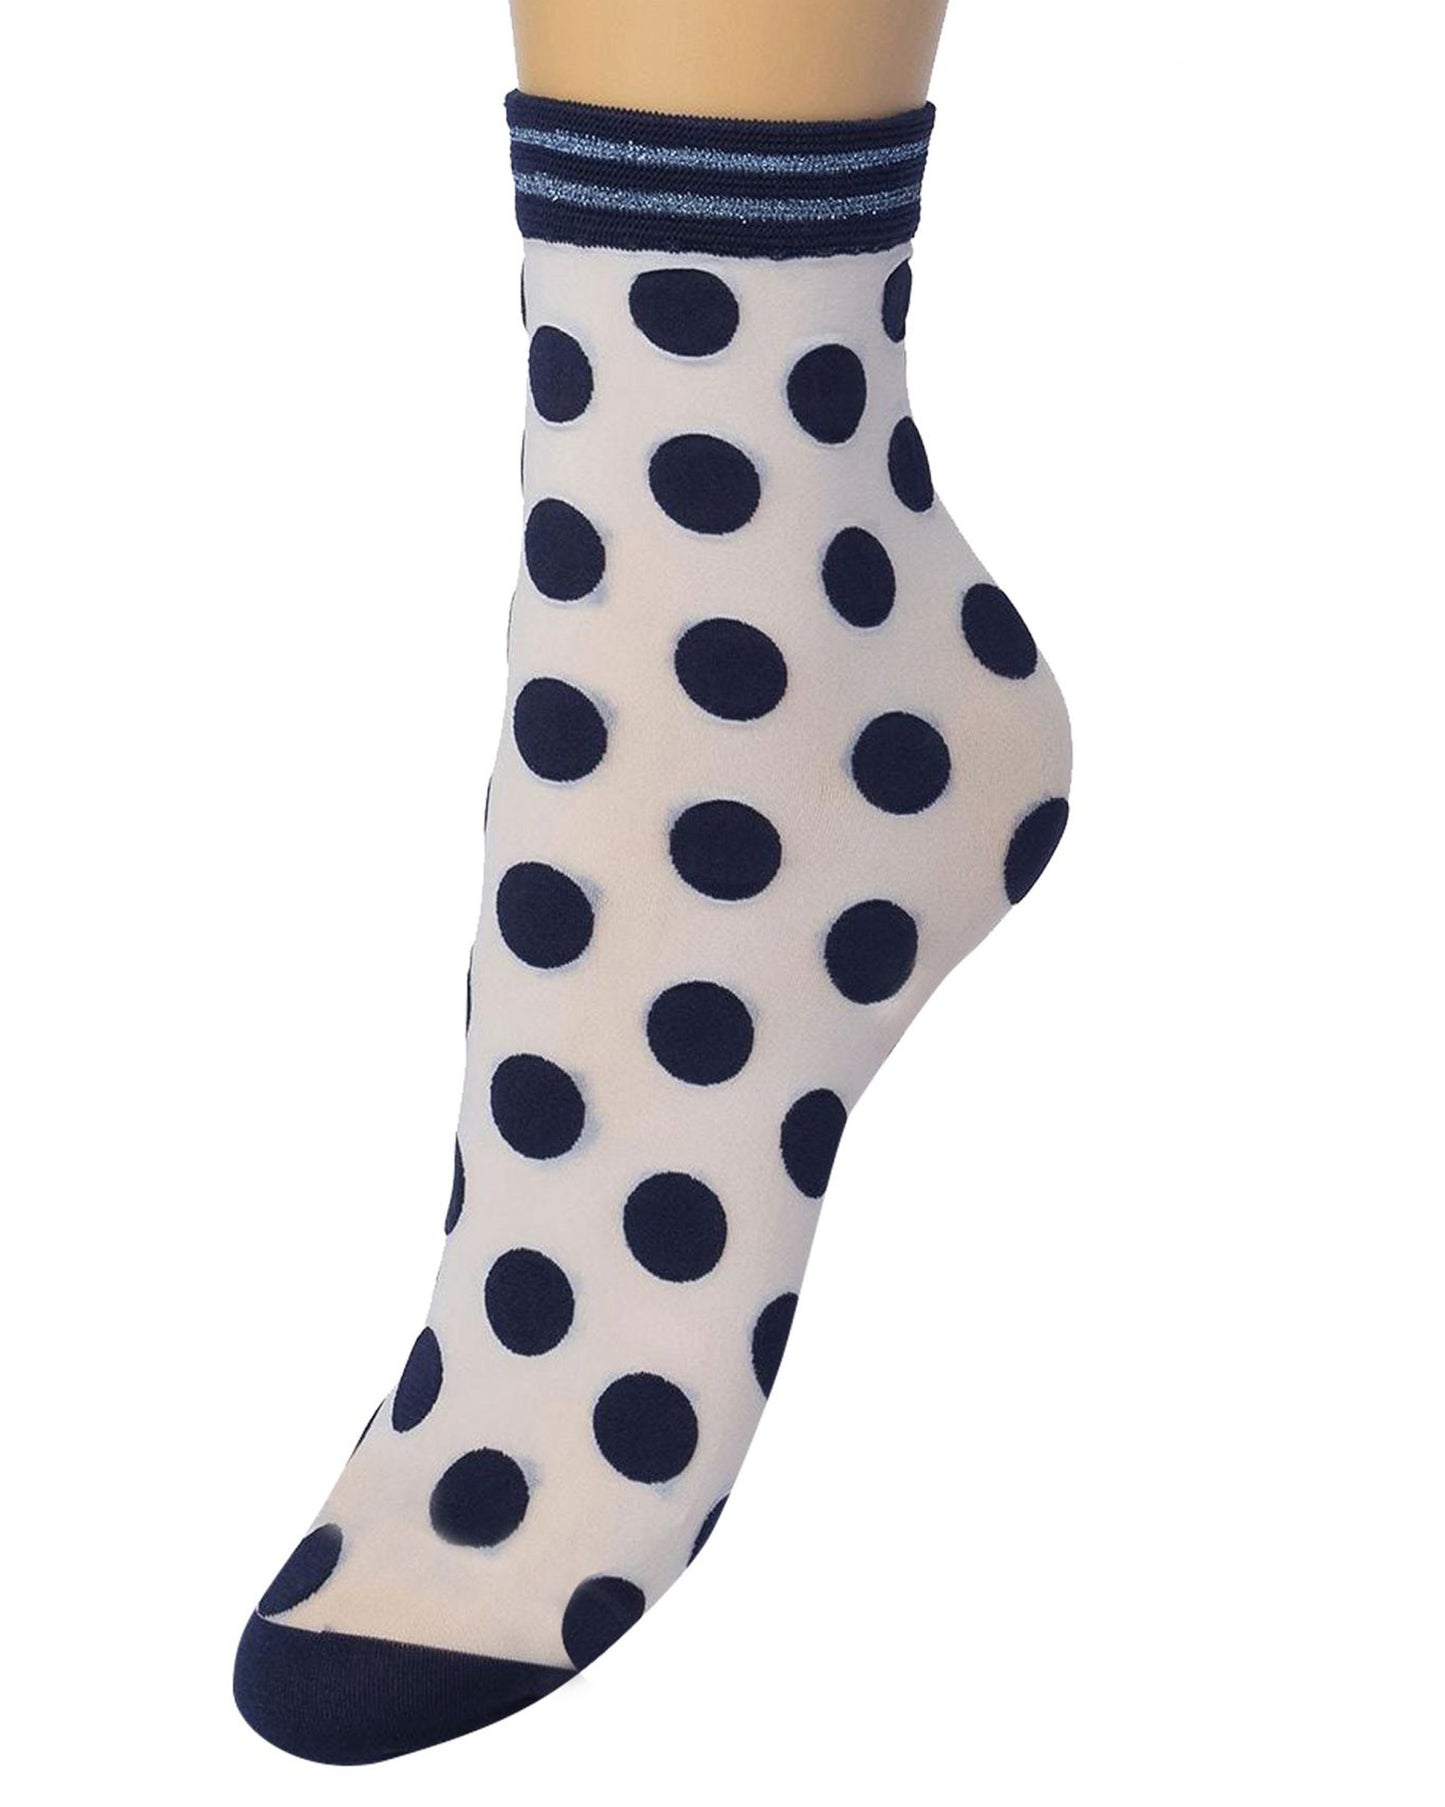 Bonnie Doon Big Dots Socks - White semi-opaque fashion ankle socks with a navy polka dot pattern, reinforced toe and striped sparkly lurex cuff.